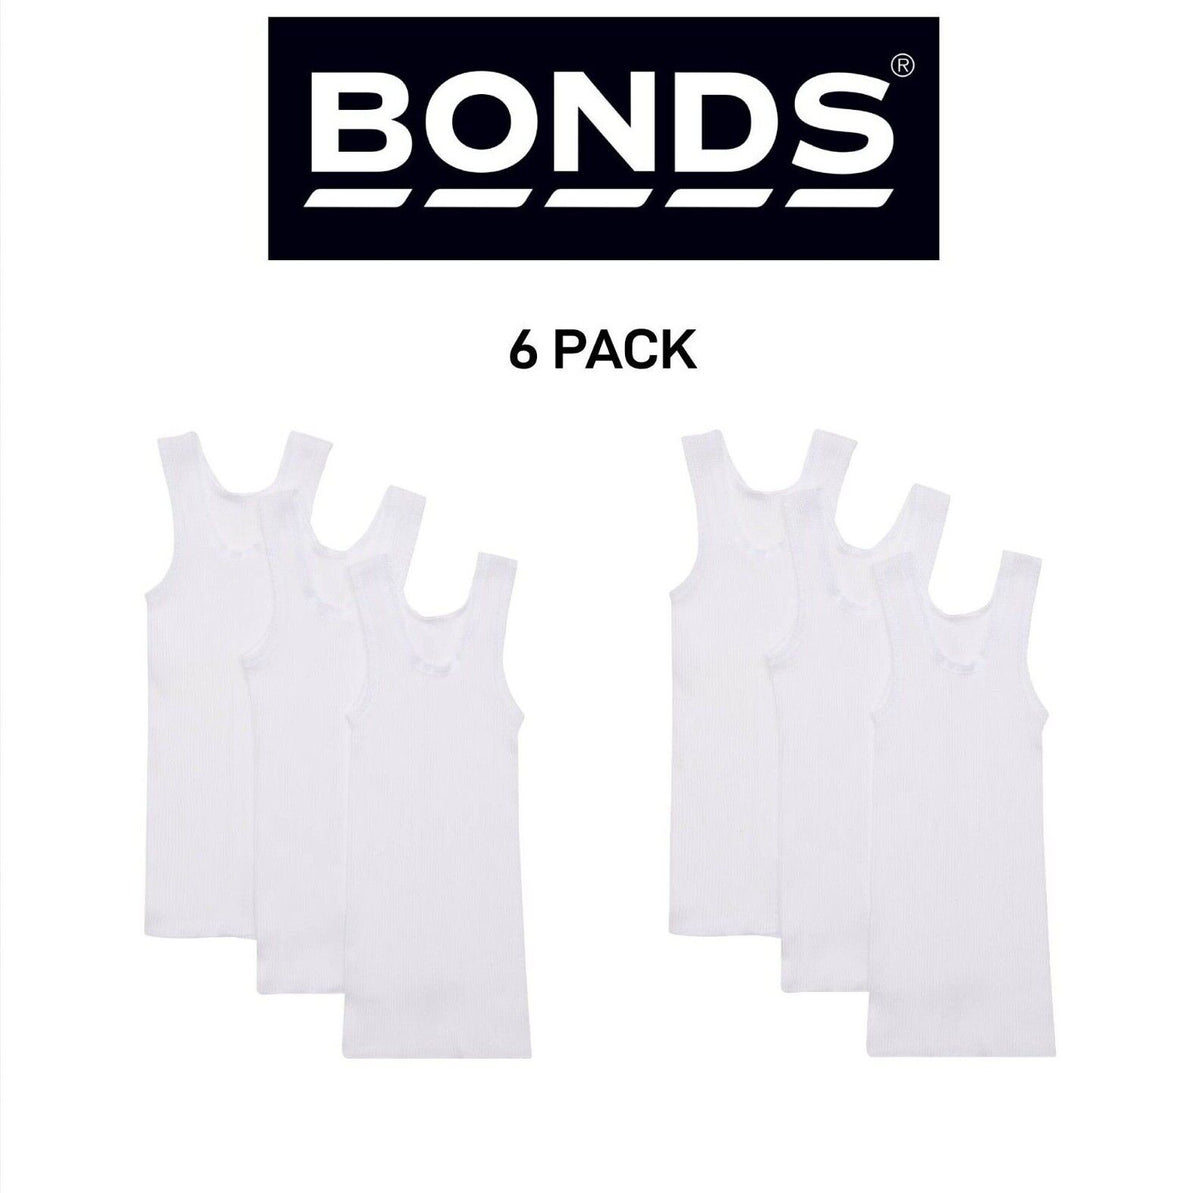 Bonds Baby Vest Extra Warmth & Comfort with Side Seamfree 6 Pack BXHNT